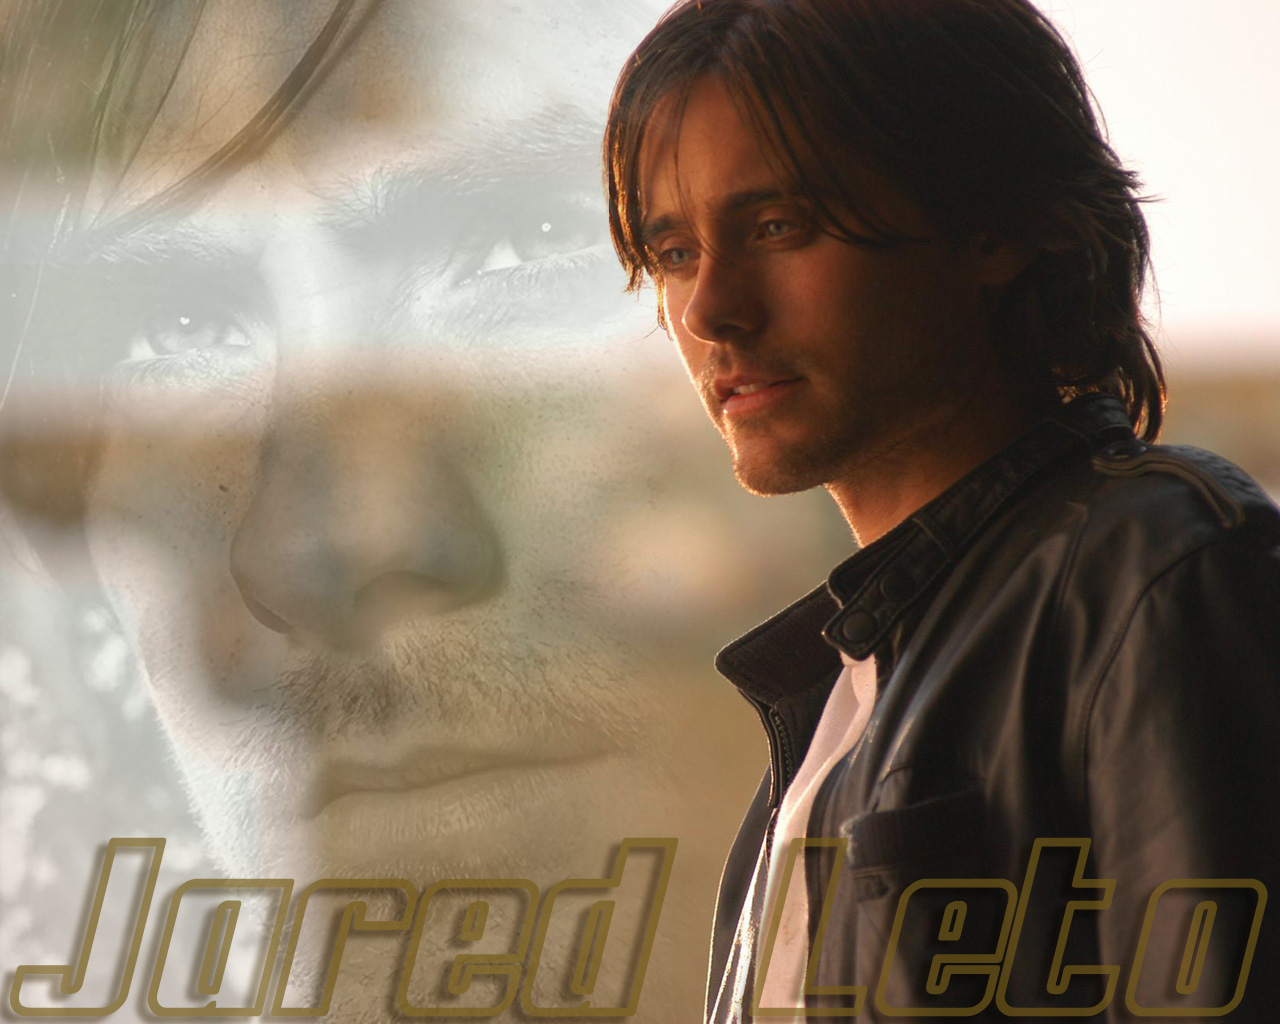 Download full size Jared Leto wallpaper / Celebrities Male / 1280x1024